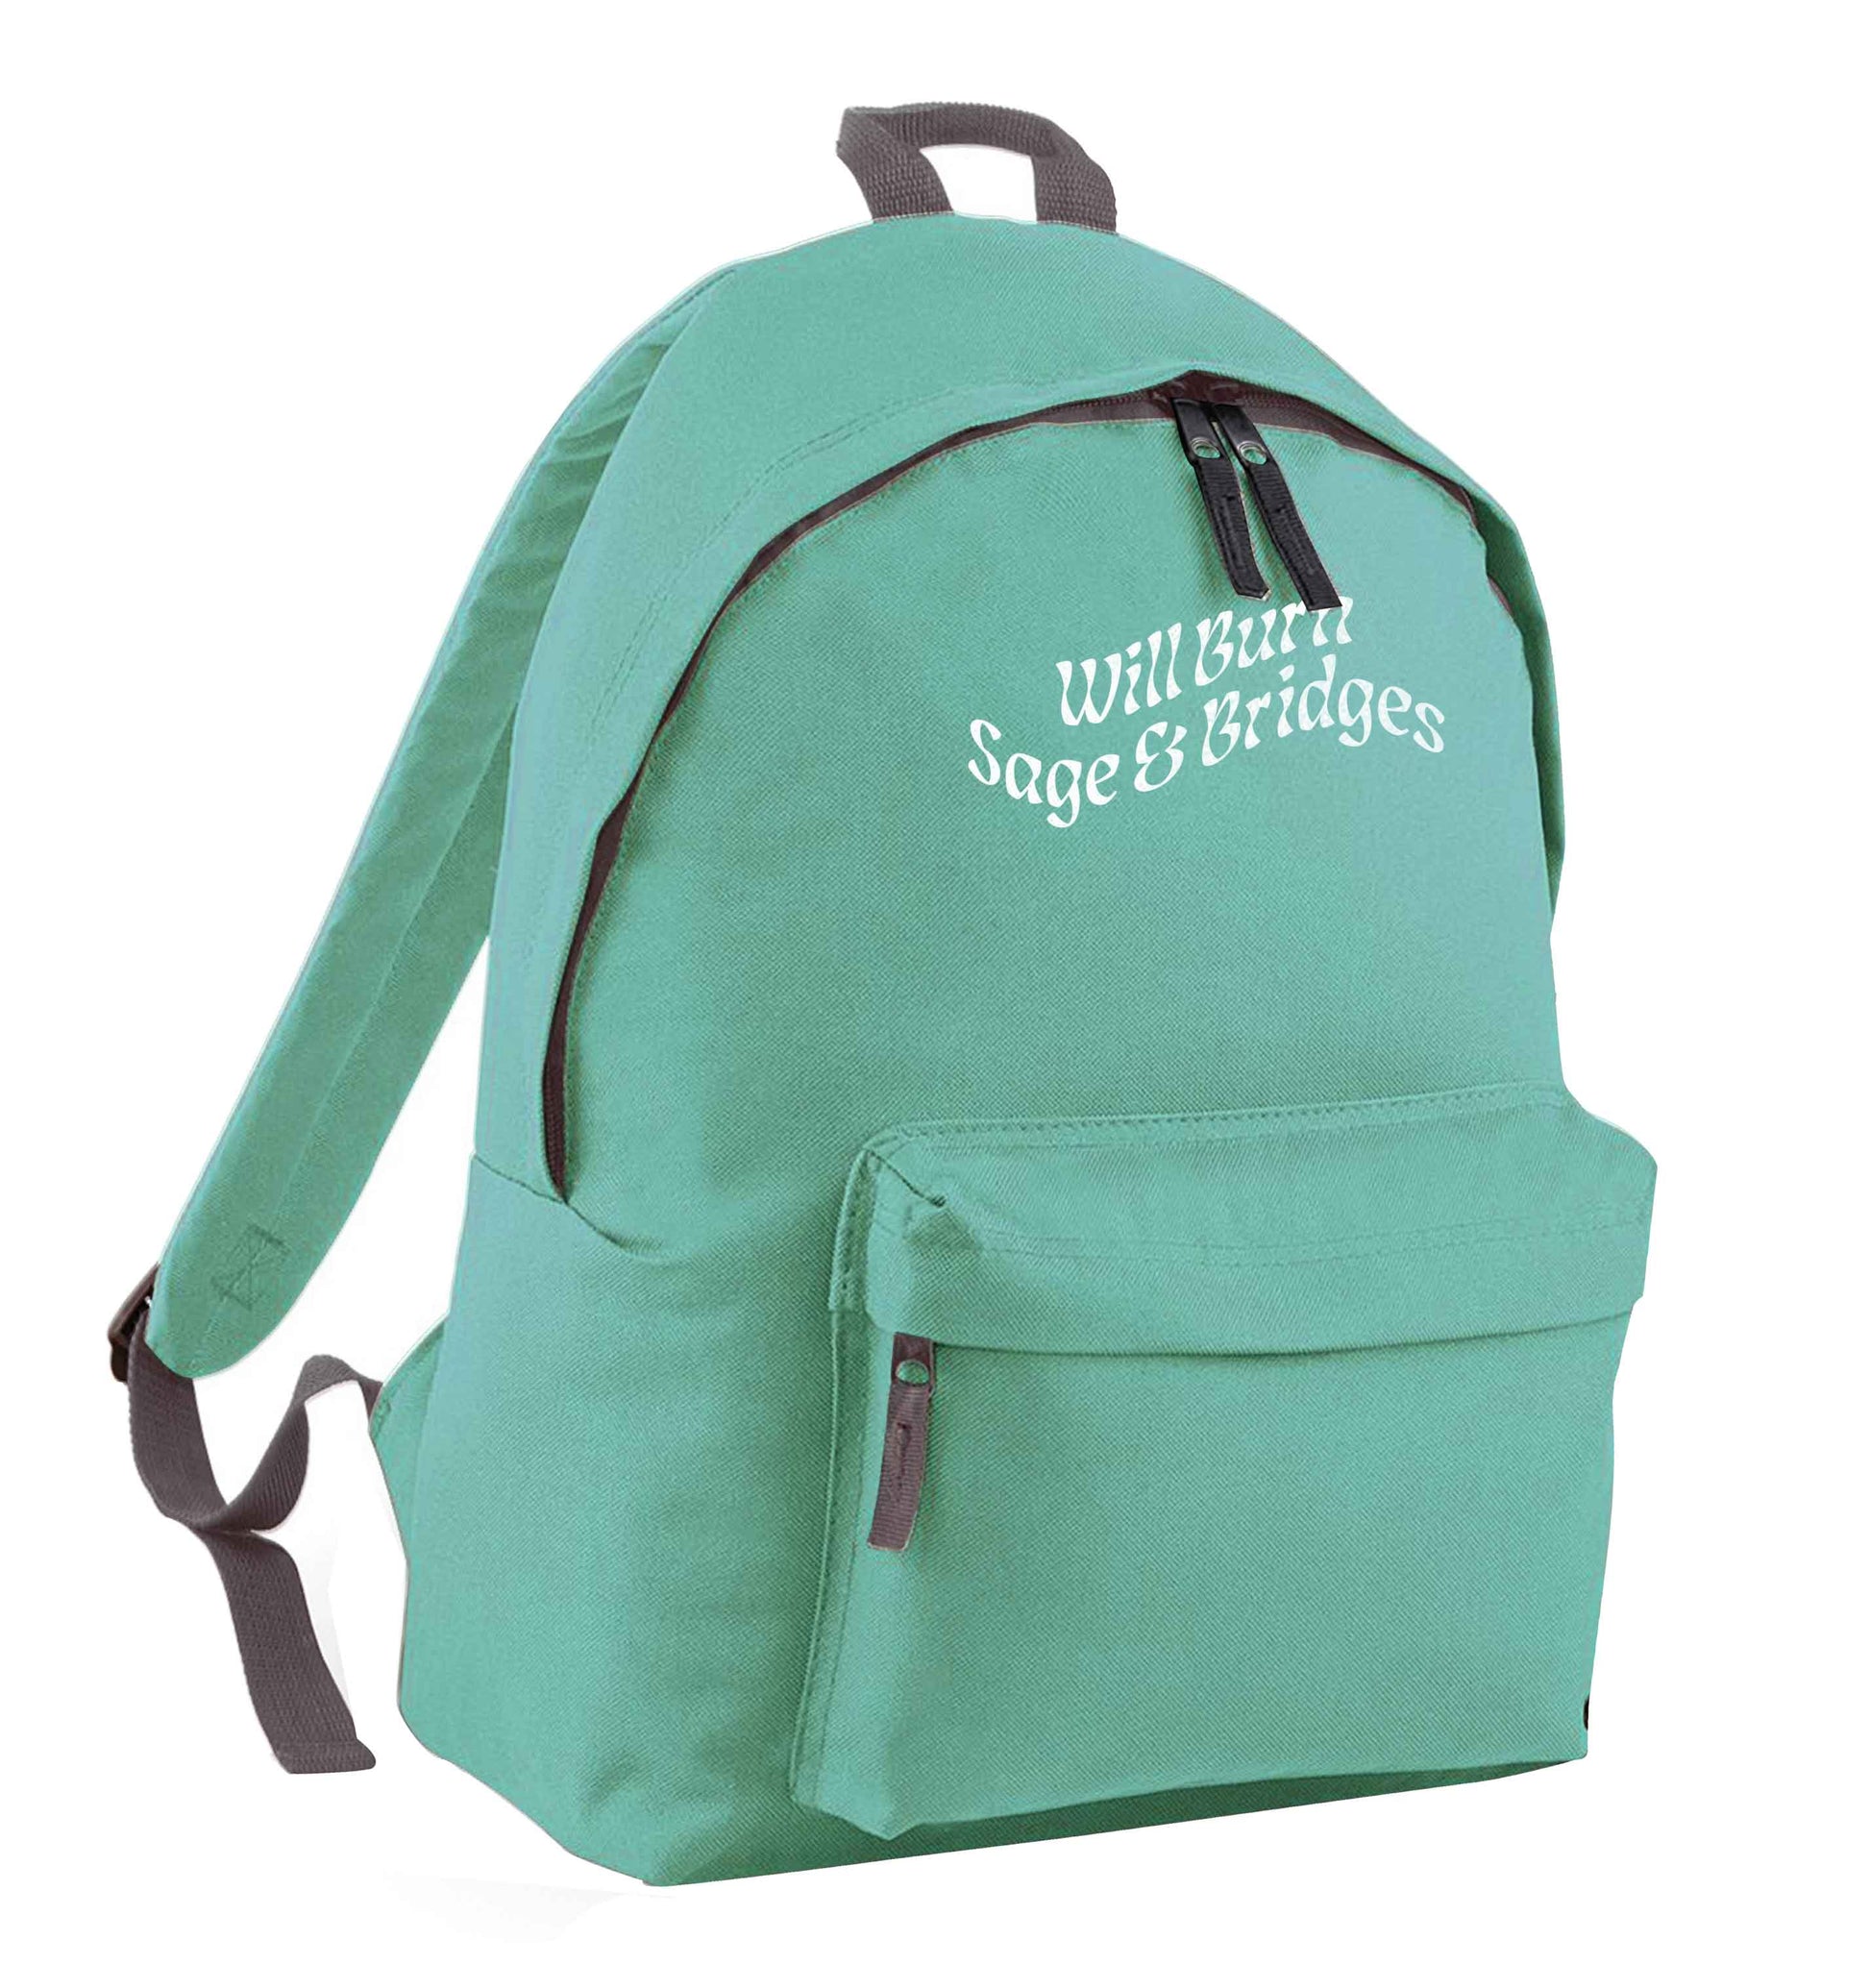 Will burn bridges and sage mint adults backpack